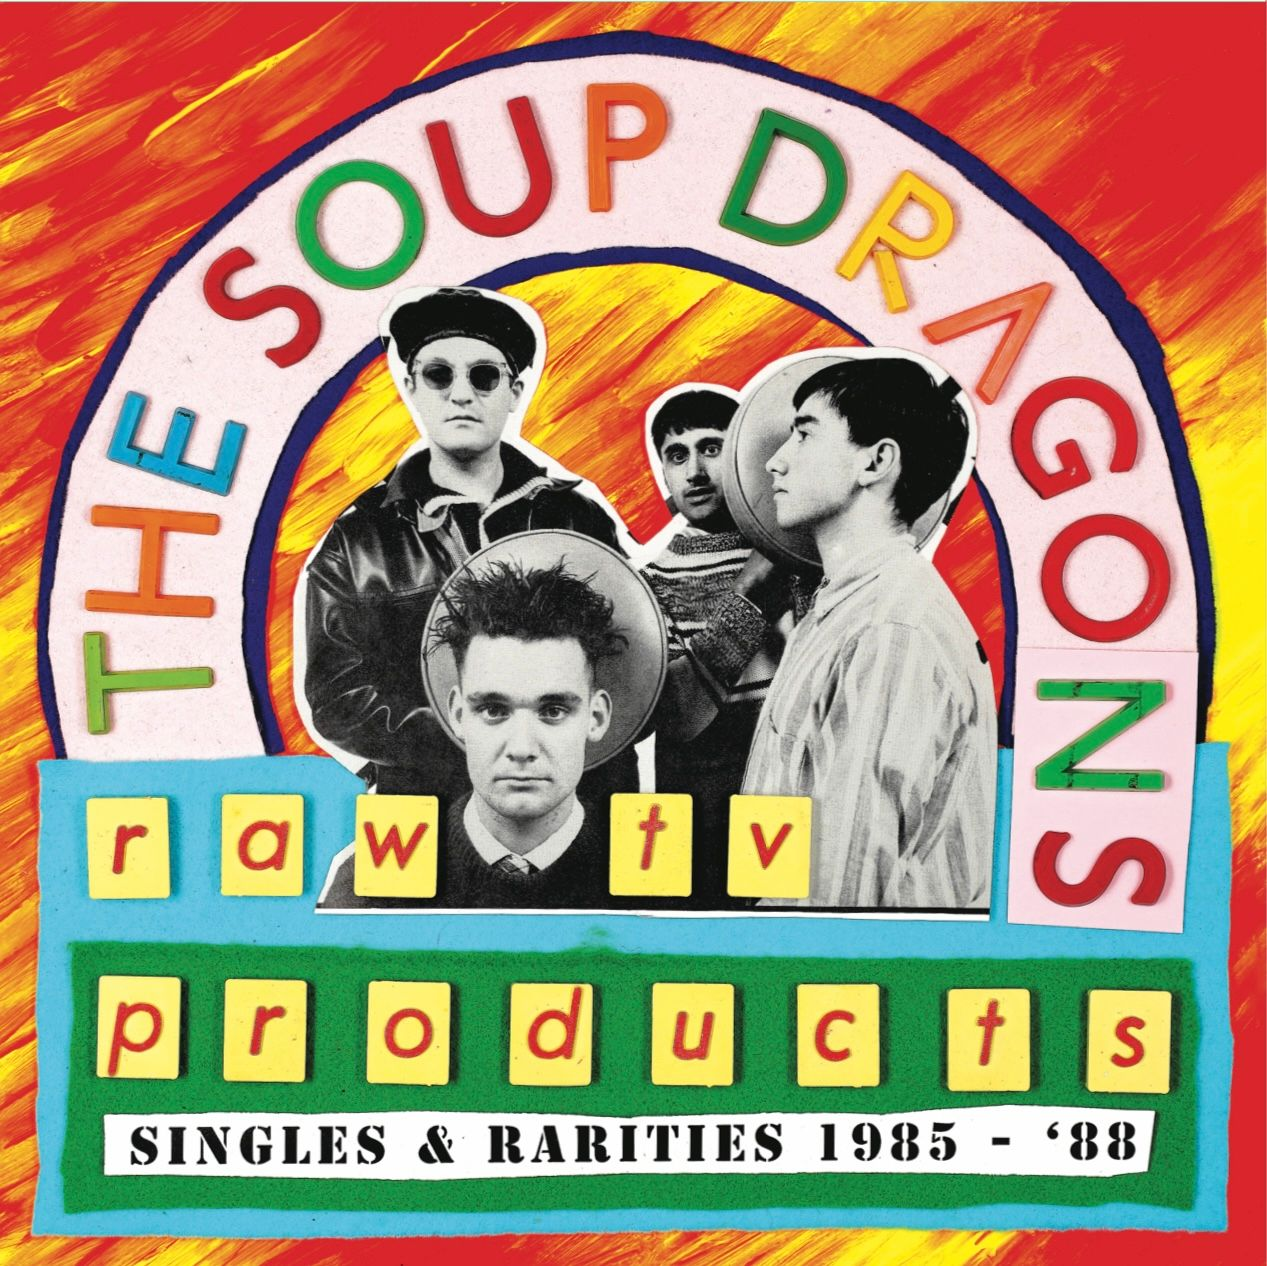 Album artwork for Album artwork for Raw TV Products - Singles and Rarities 1985-88 by The Soup Dragons by Raw TV Products - Singles and Rarities 1985-88 - The Soup Dragons